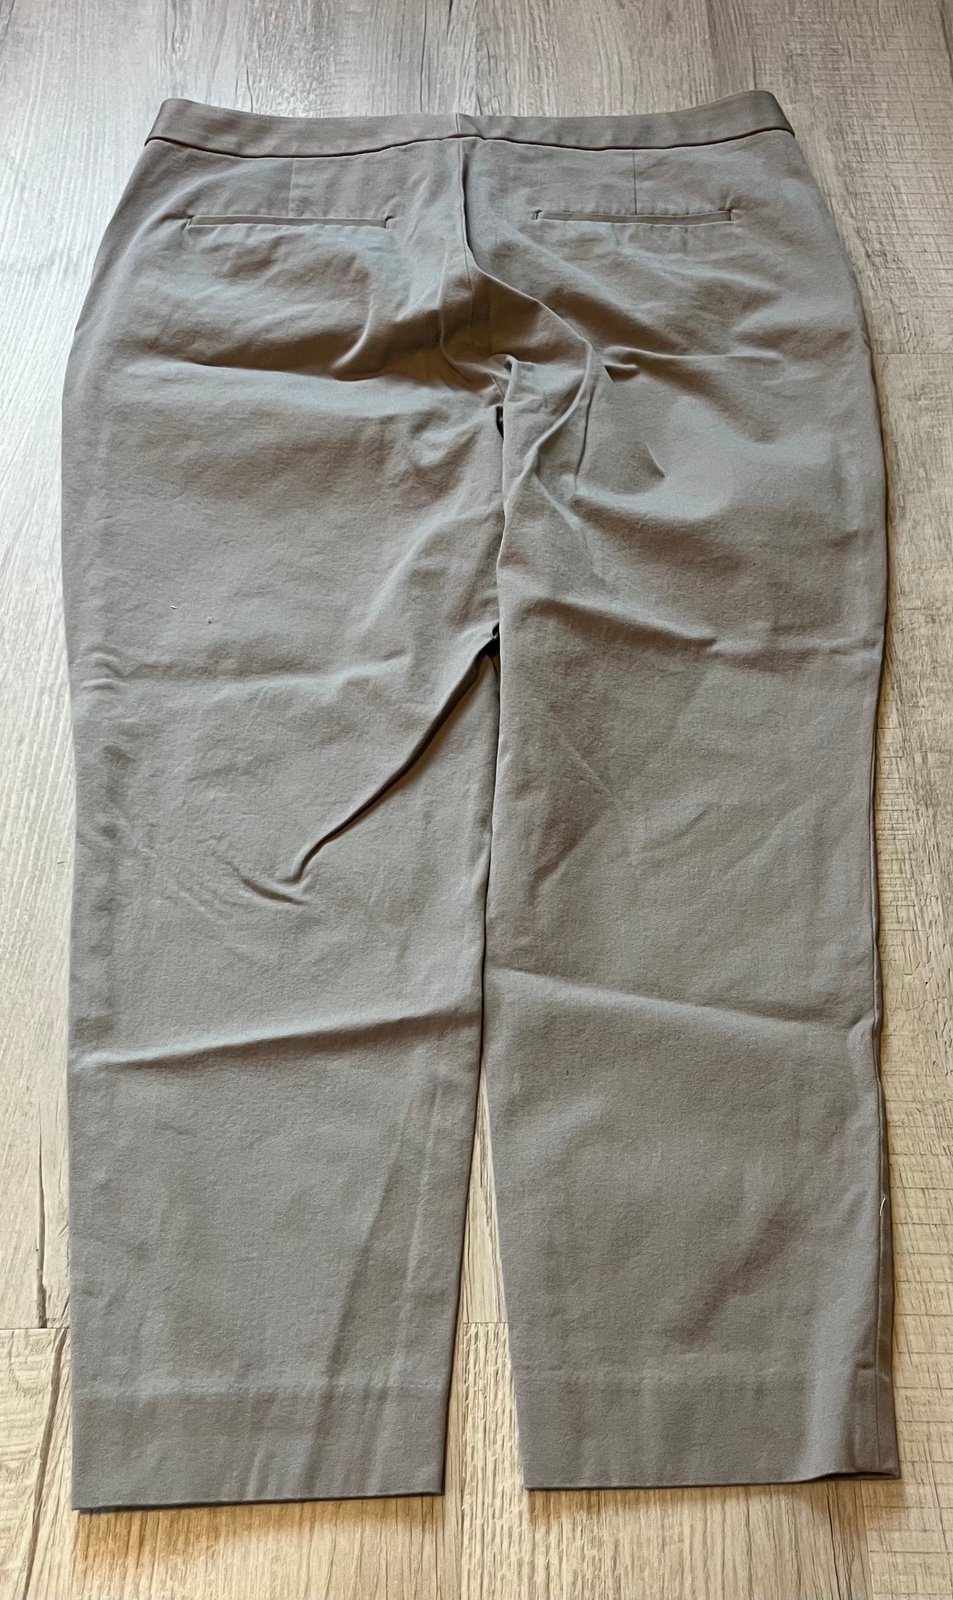 save up to 70% Banana Republic high rise slim ankle pants stretch size 16 fLjaG2II1 Everyday Low Prices